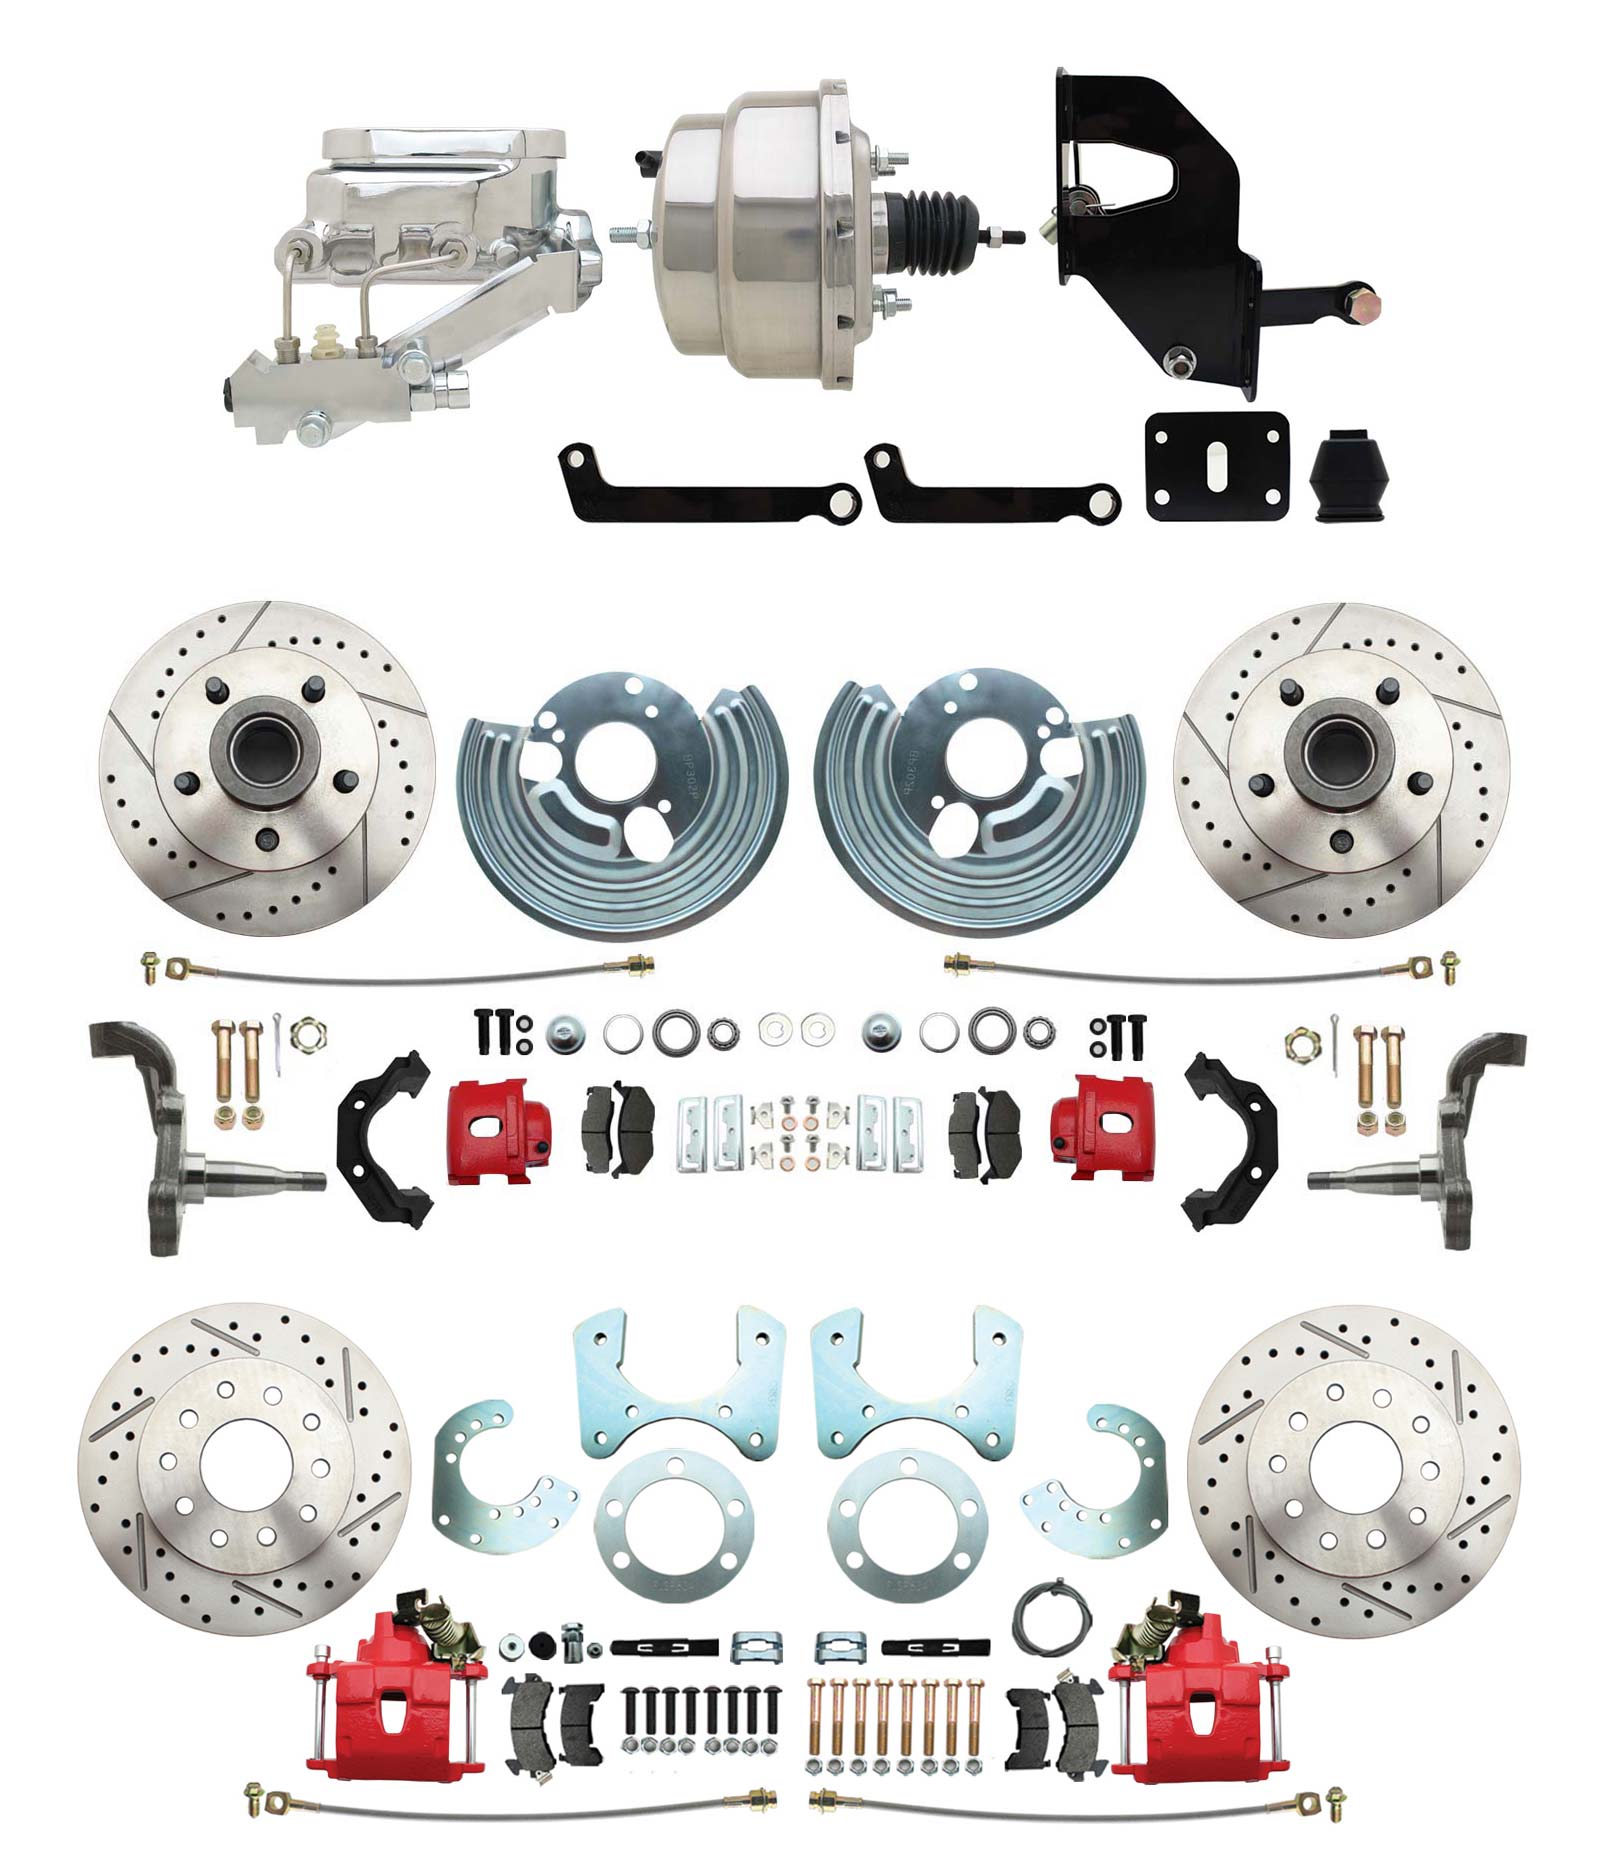 1962-72 Mopar B&E Body Front & Rear Disc Brake Conversion Kit W/ Drilled & Slotted Rotors & Powder Coated Red Calipers ( Charger, Challenger, Coronet) W/ 8 Dual Chrome Booster Conversion Kit W/ Flat Top Chrome Master Kit